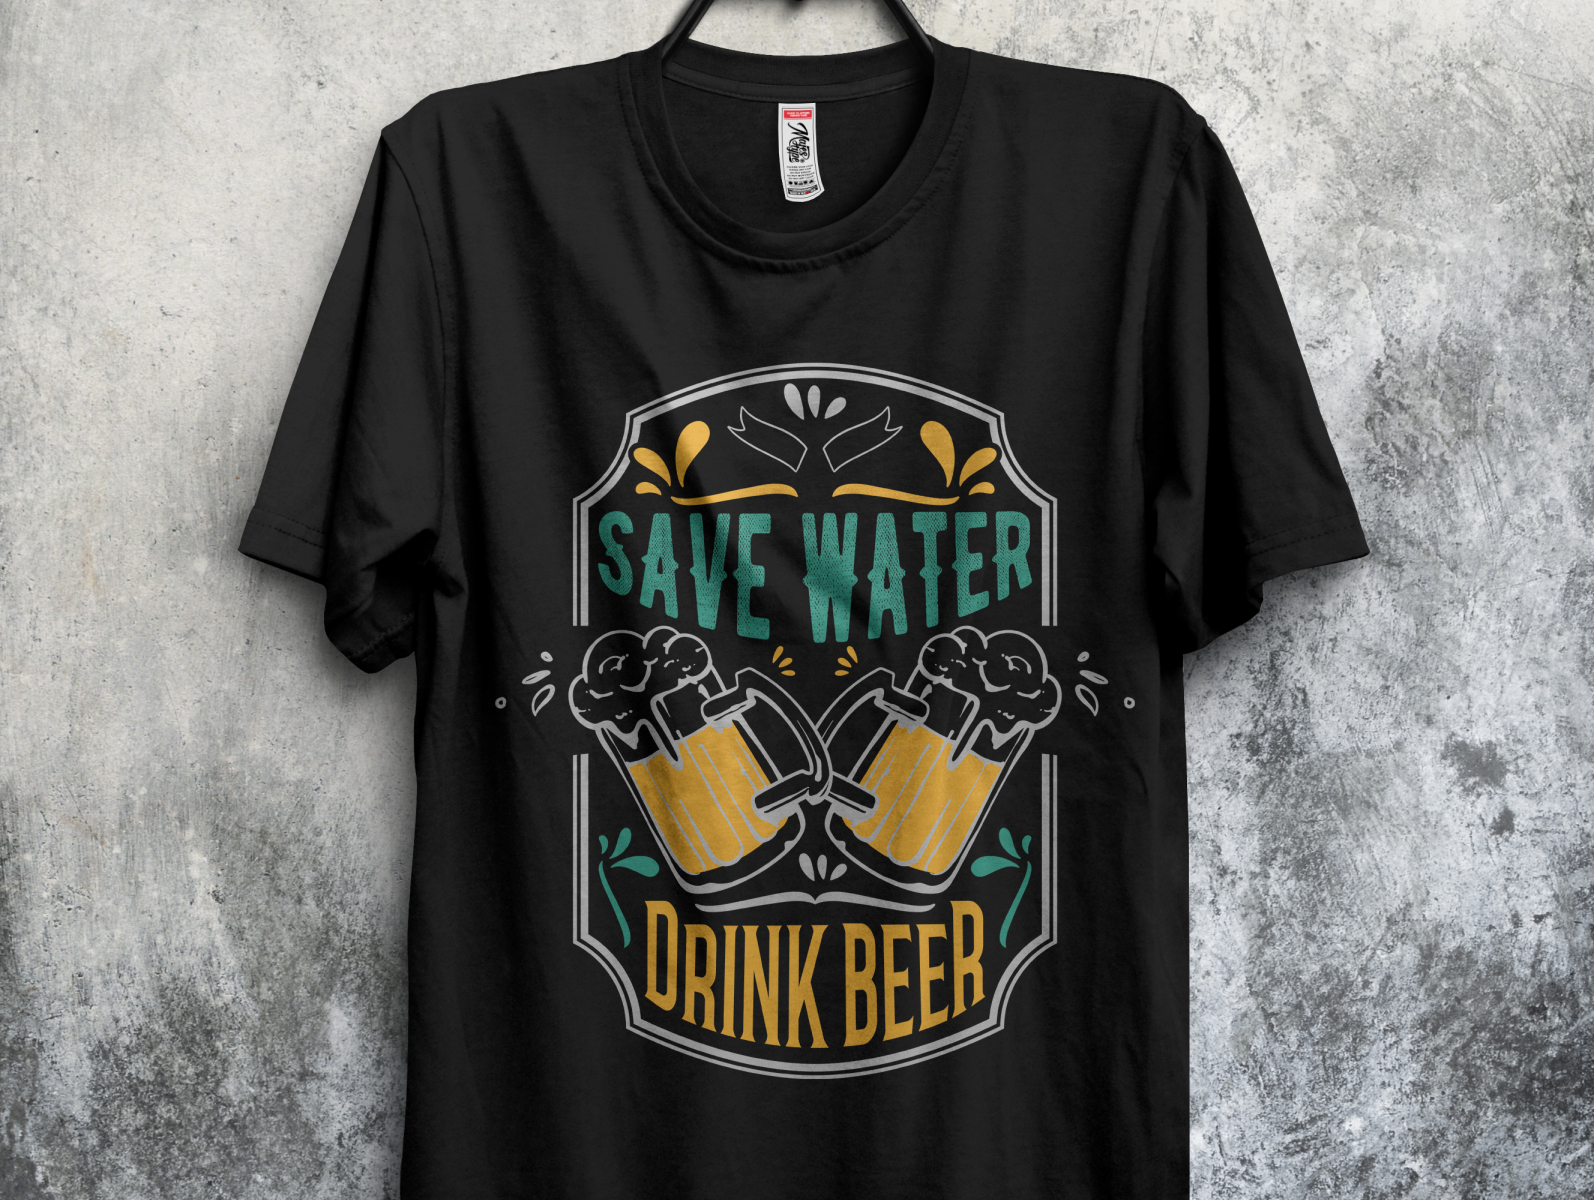 Drink Beer T-shirt Design by Imrul Kaish on Dribbble